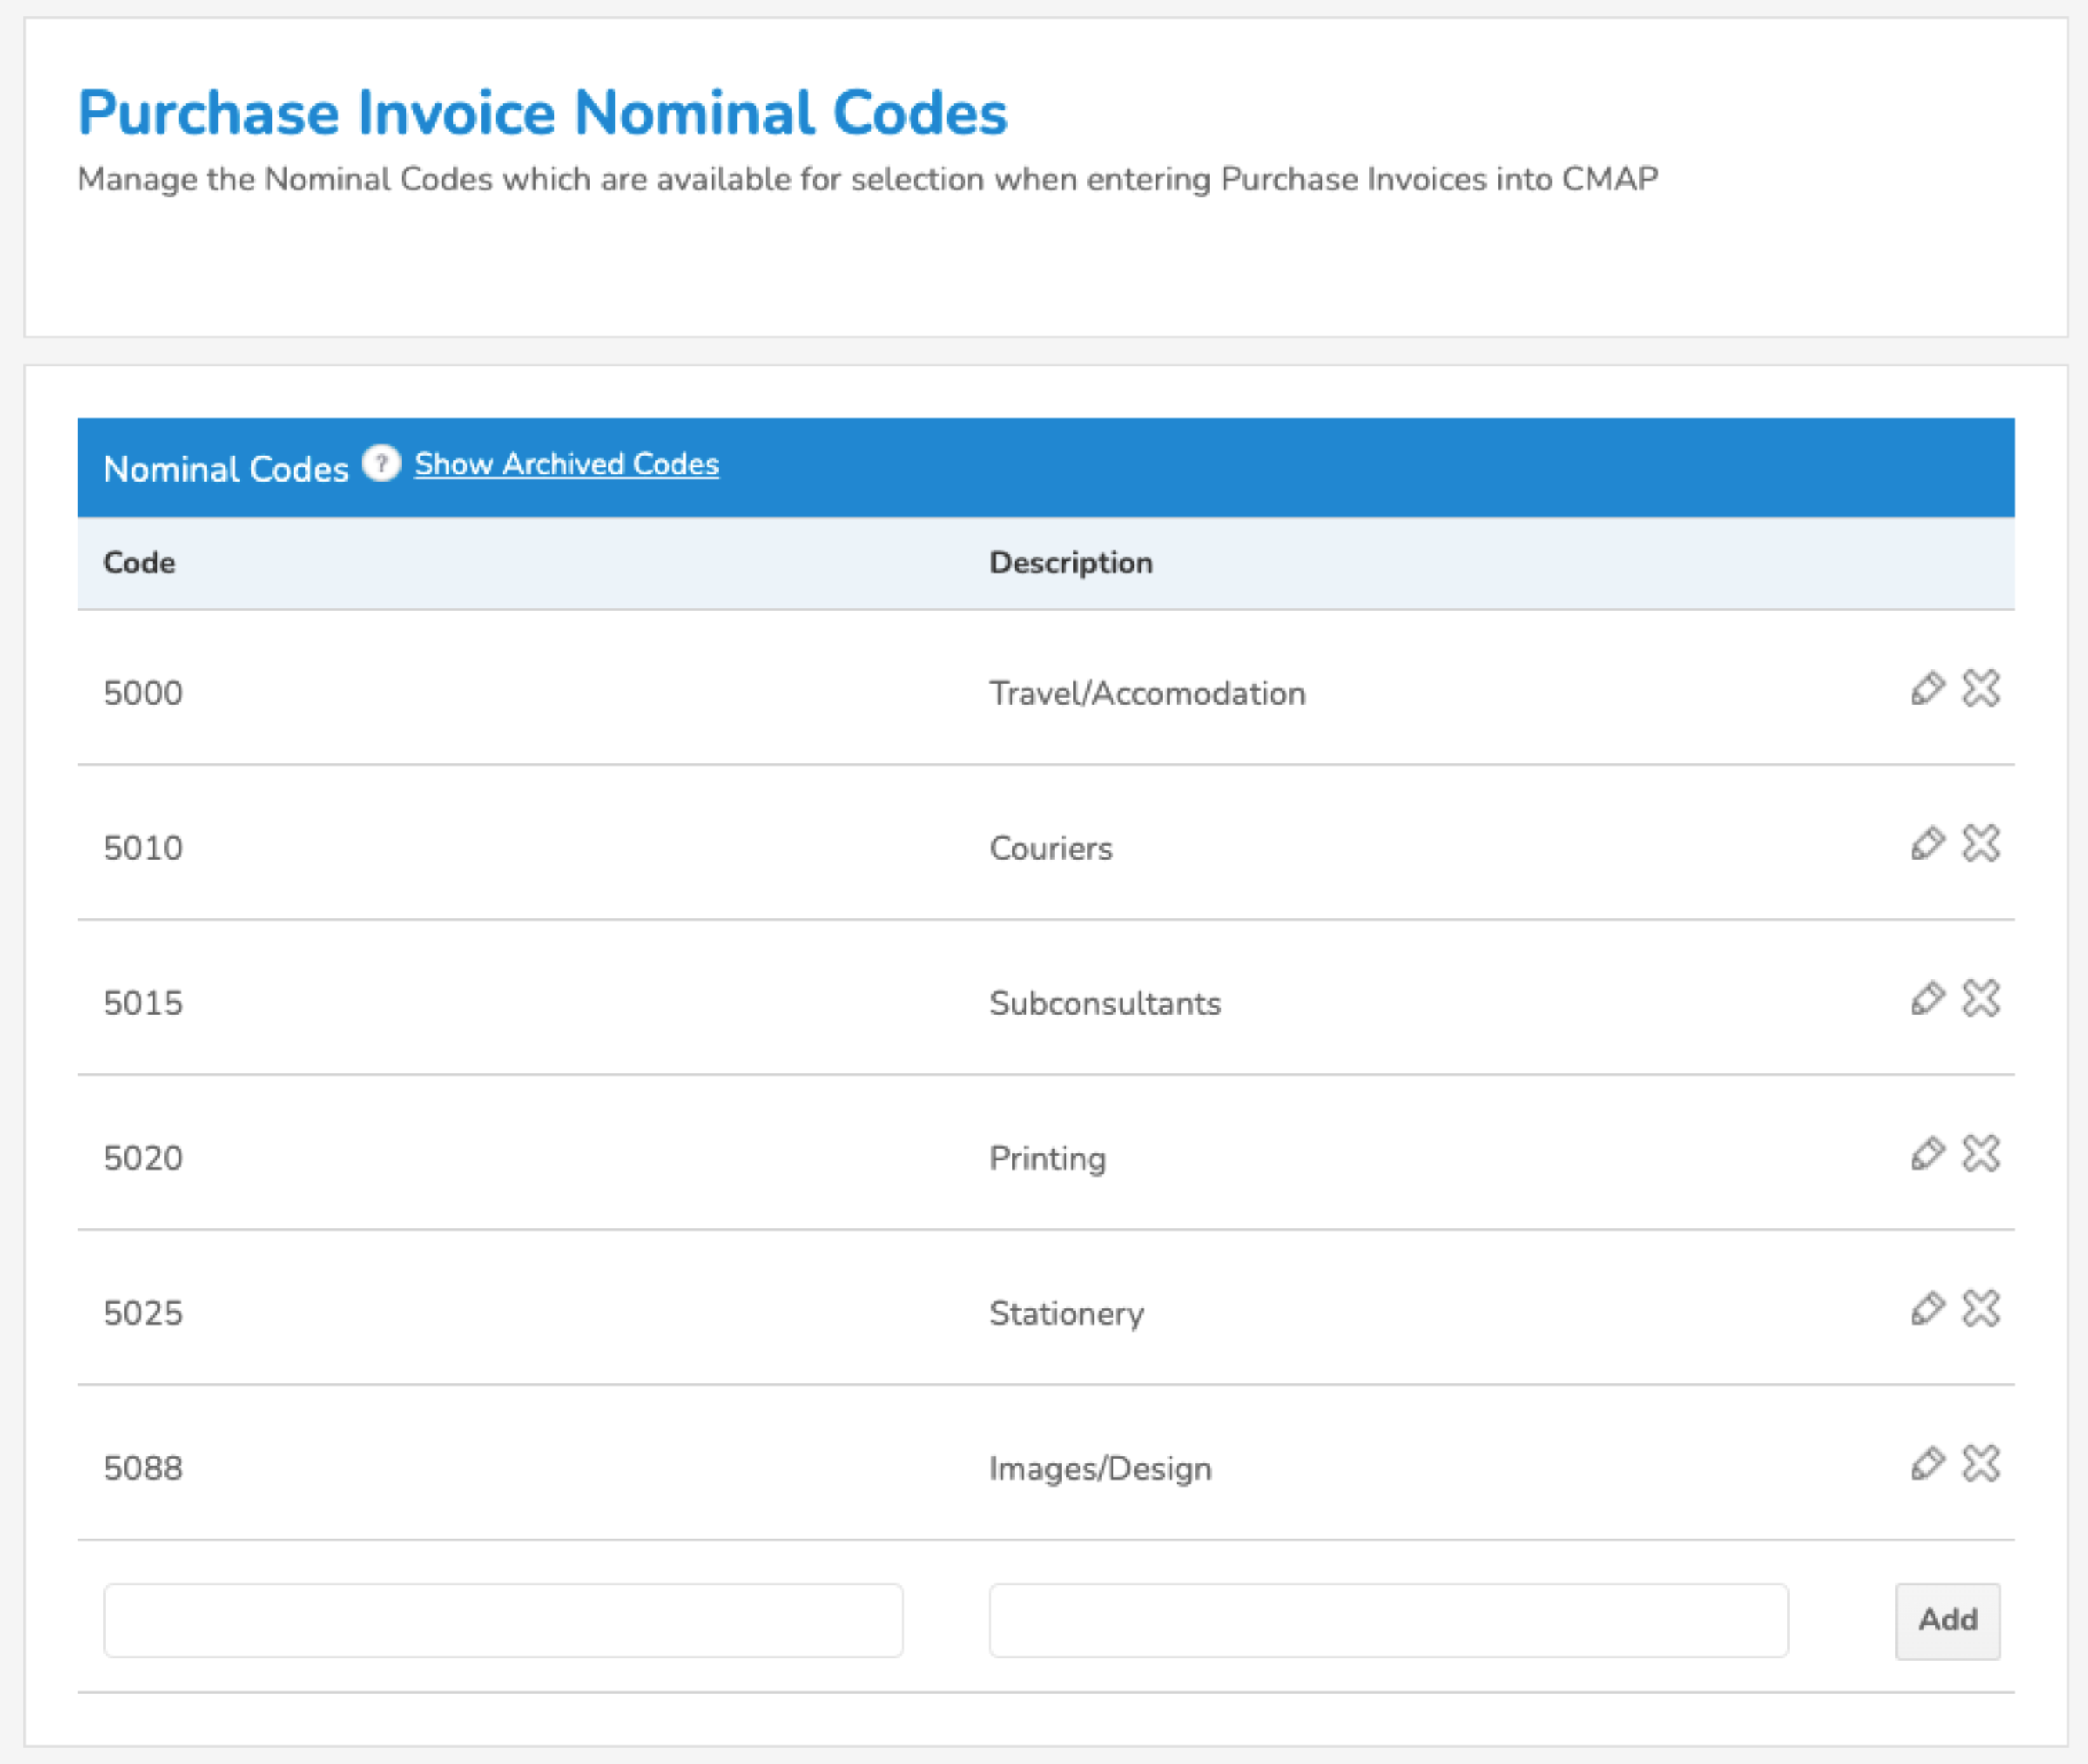 Purchase_Invoice_Nominal_Codes.png